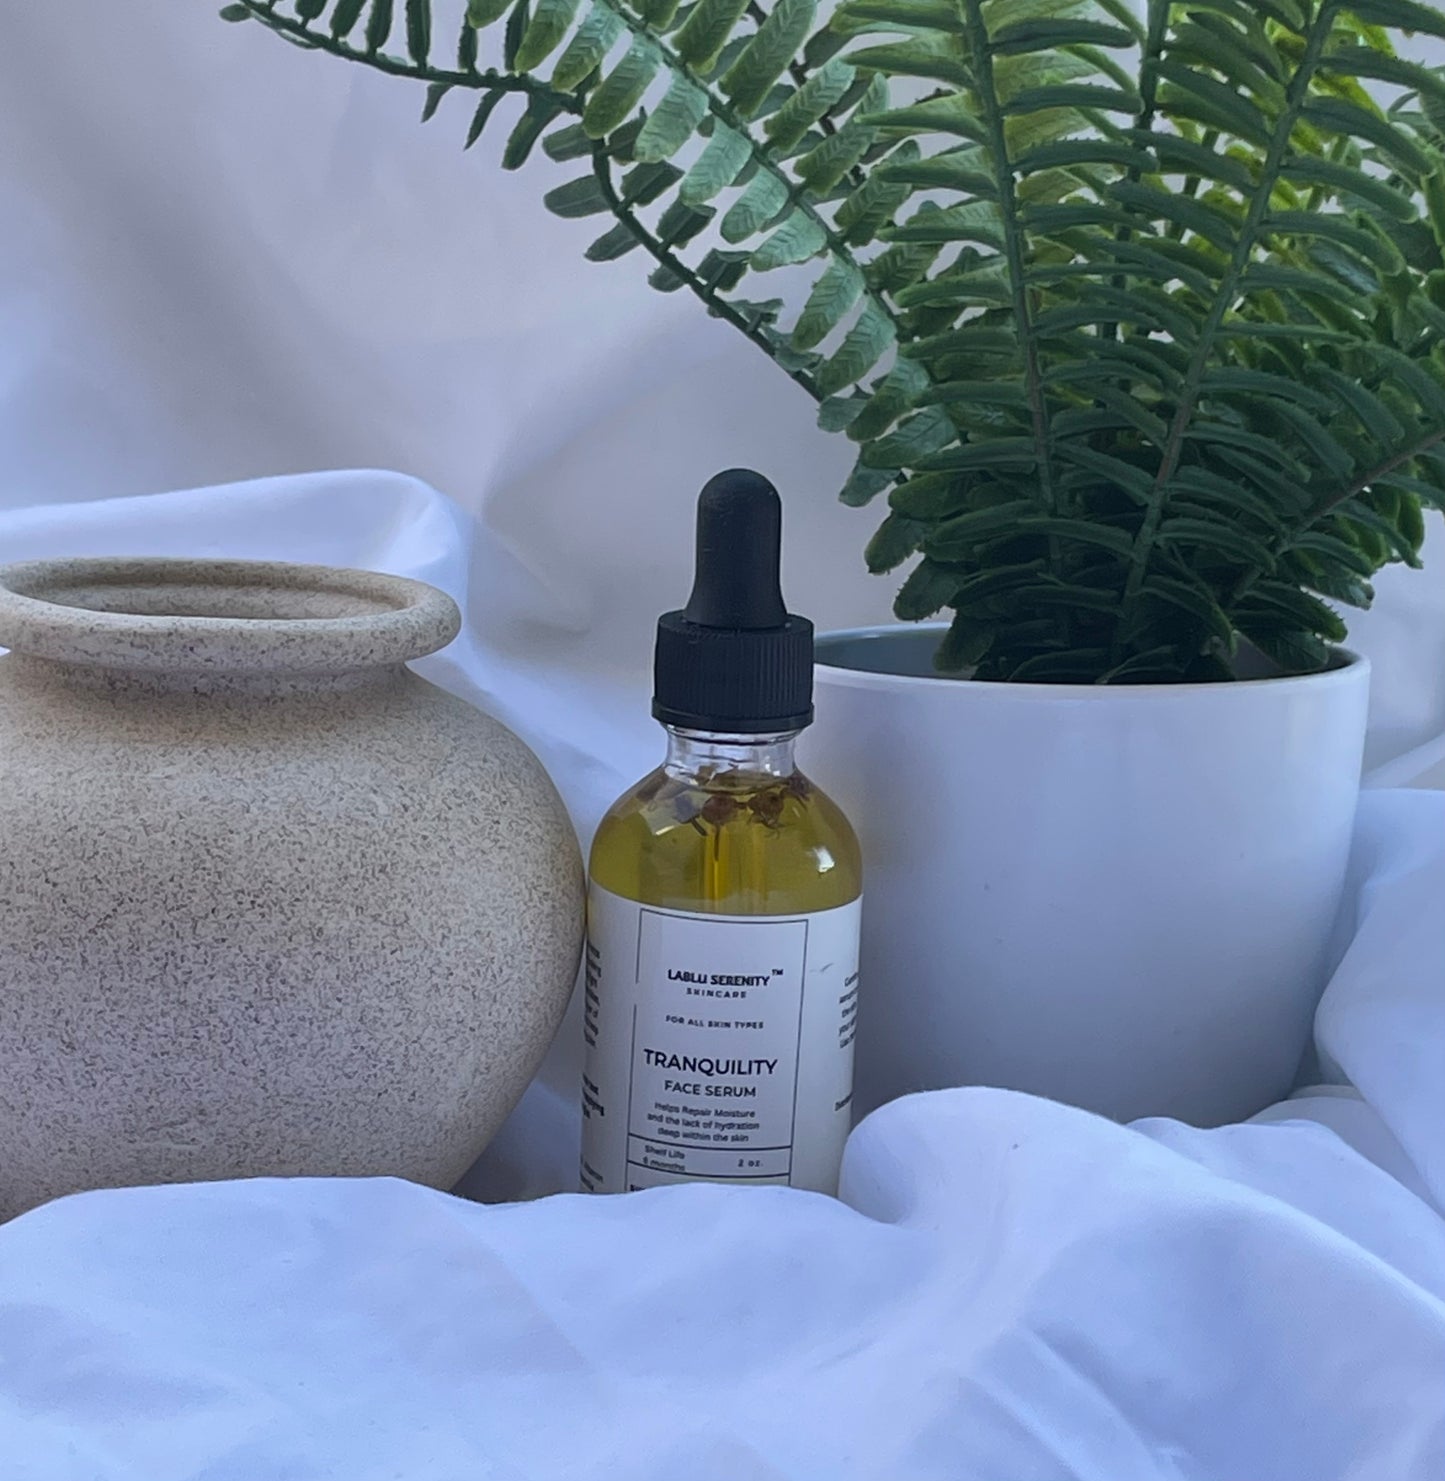 TRANQUILITY FACE SERUM